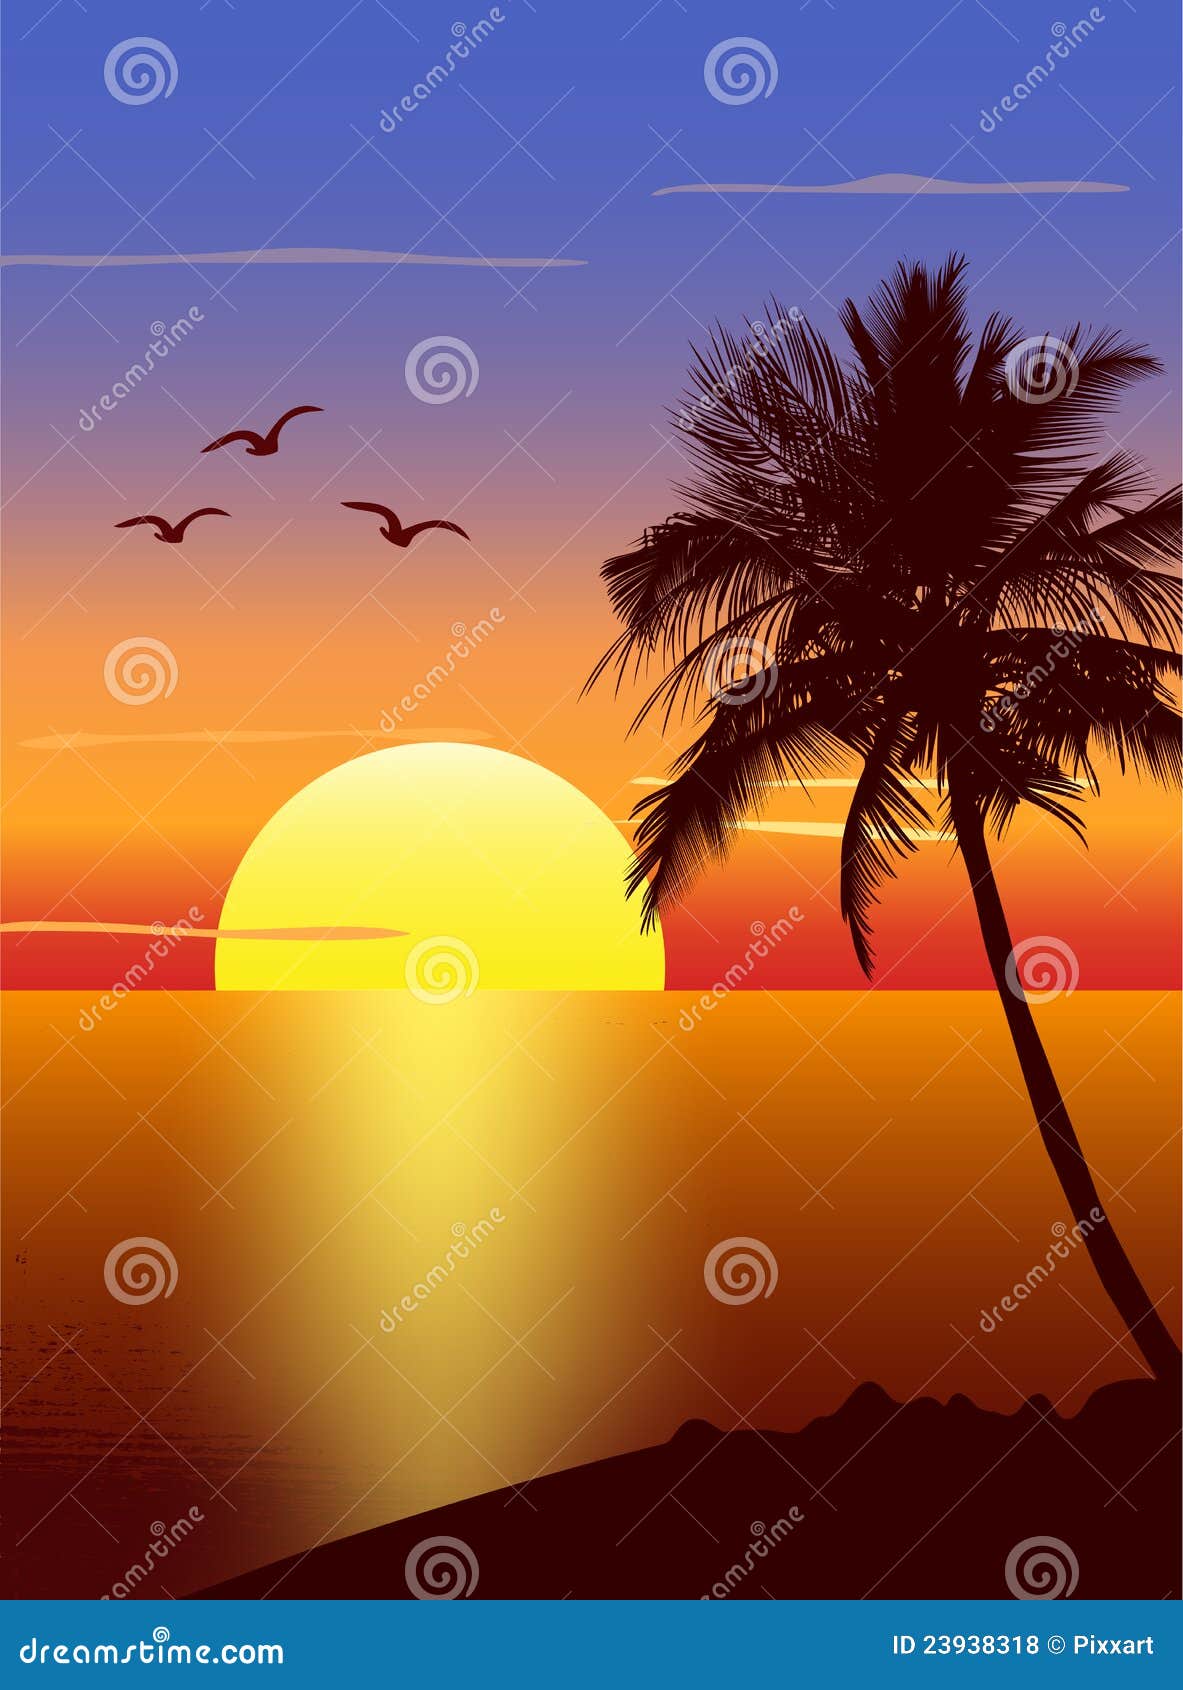 sunset with palmtree silhouette